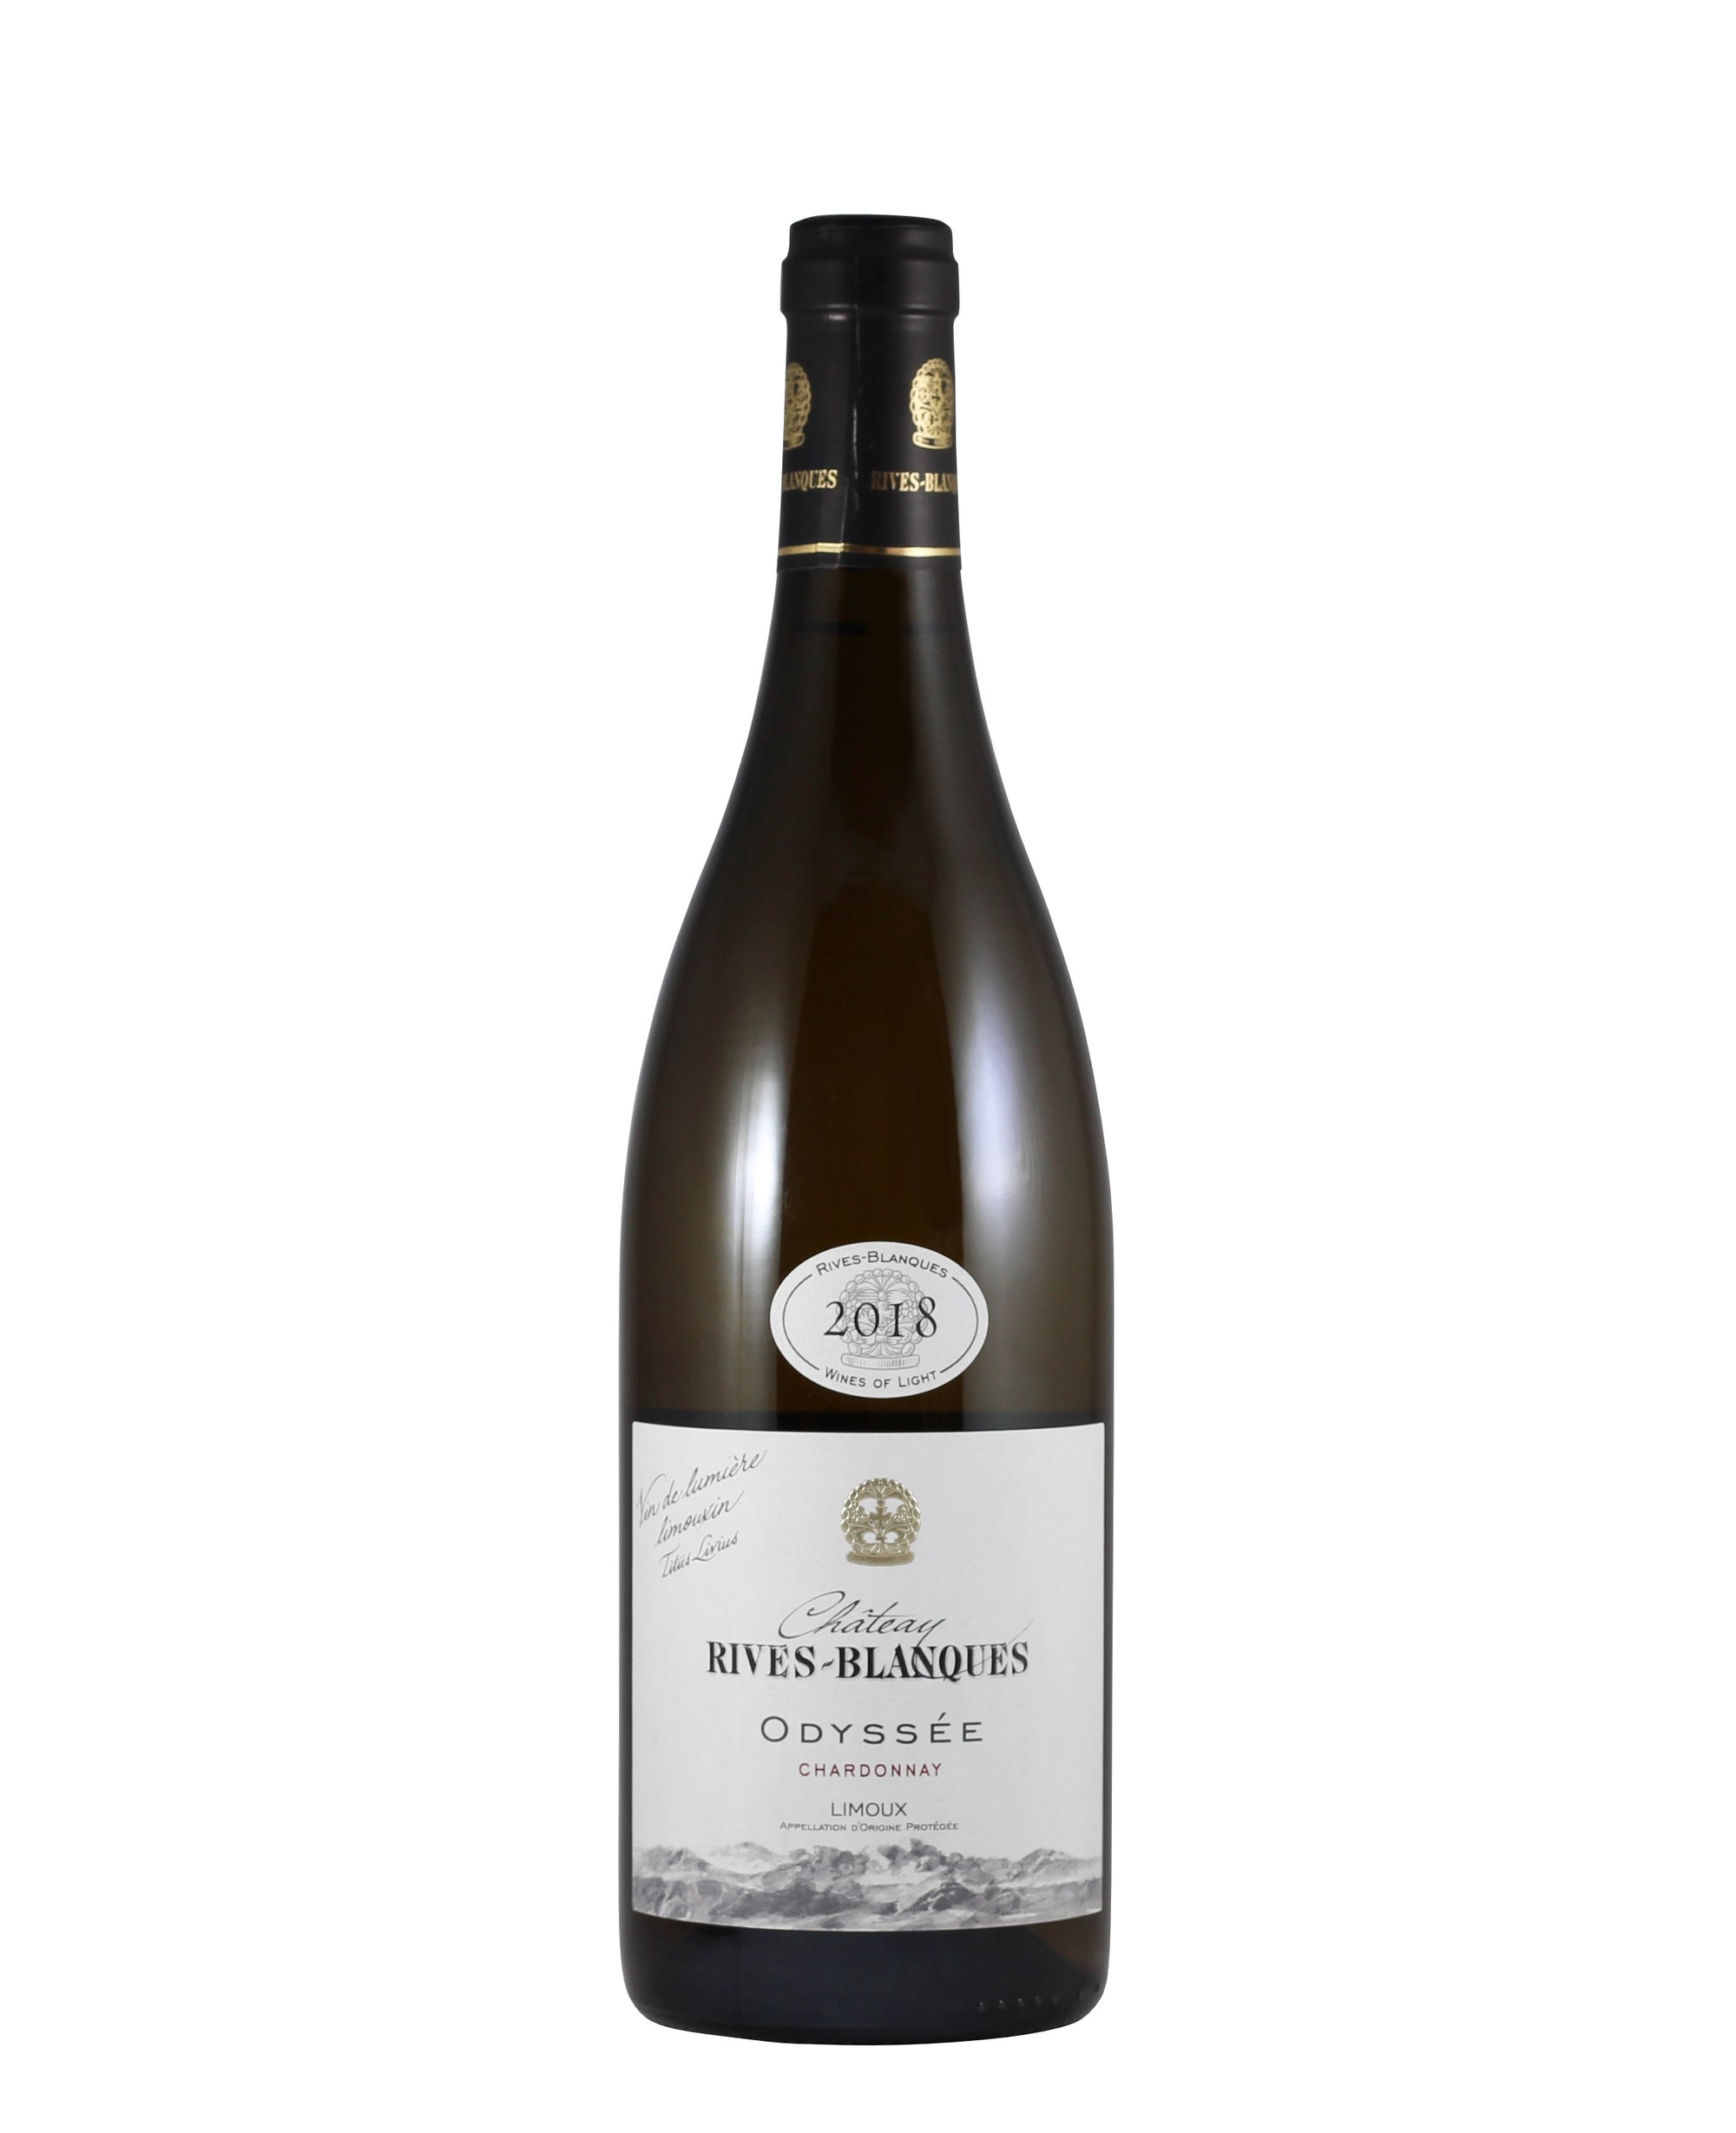 *9W* 2018 Rives-Blanques “Odyssee” Chardonnay Limoux (Languedoc-Roussillon, FR)